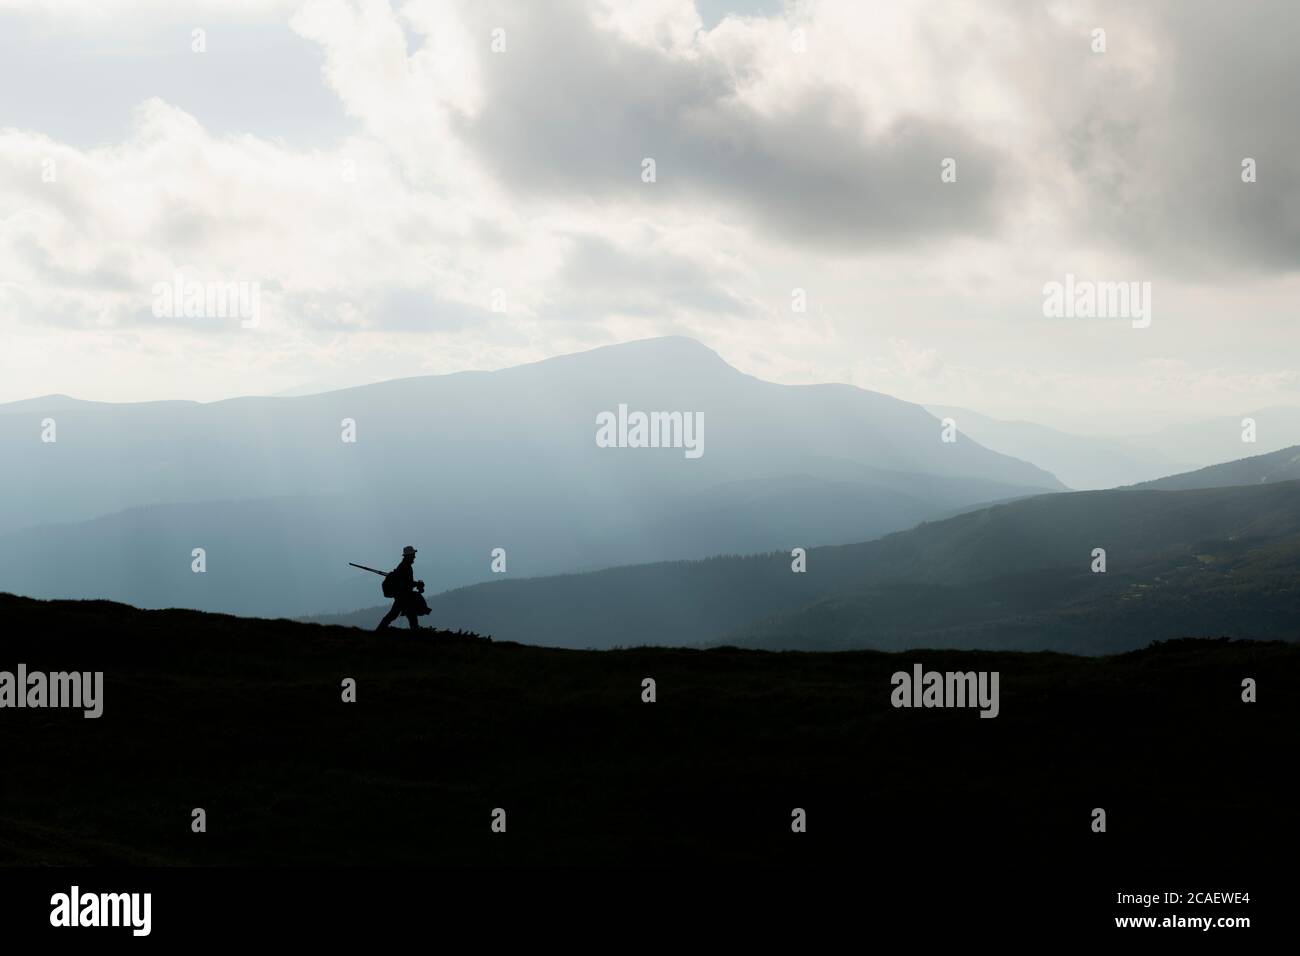 A silhouette of a photographer with a tripod against the backdrop of the majestic mountains. Landscape photography Stock Photo